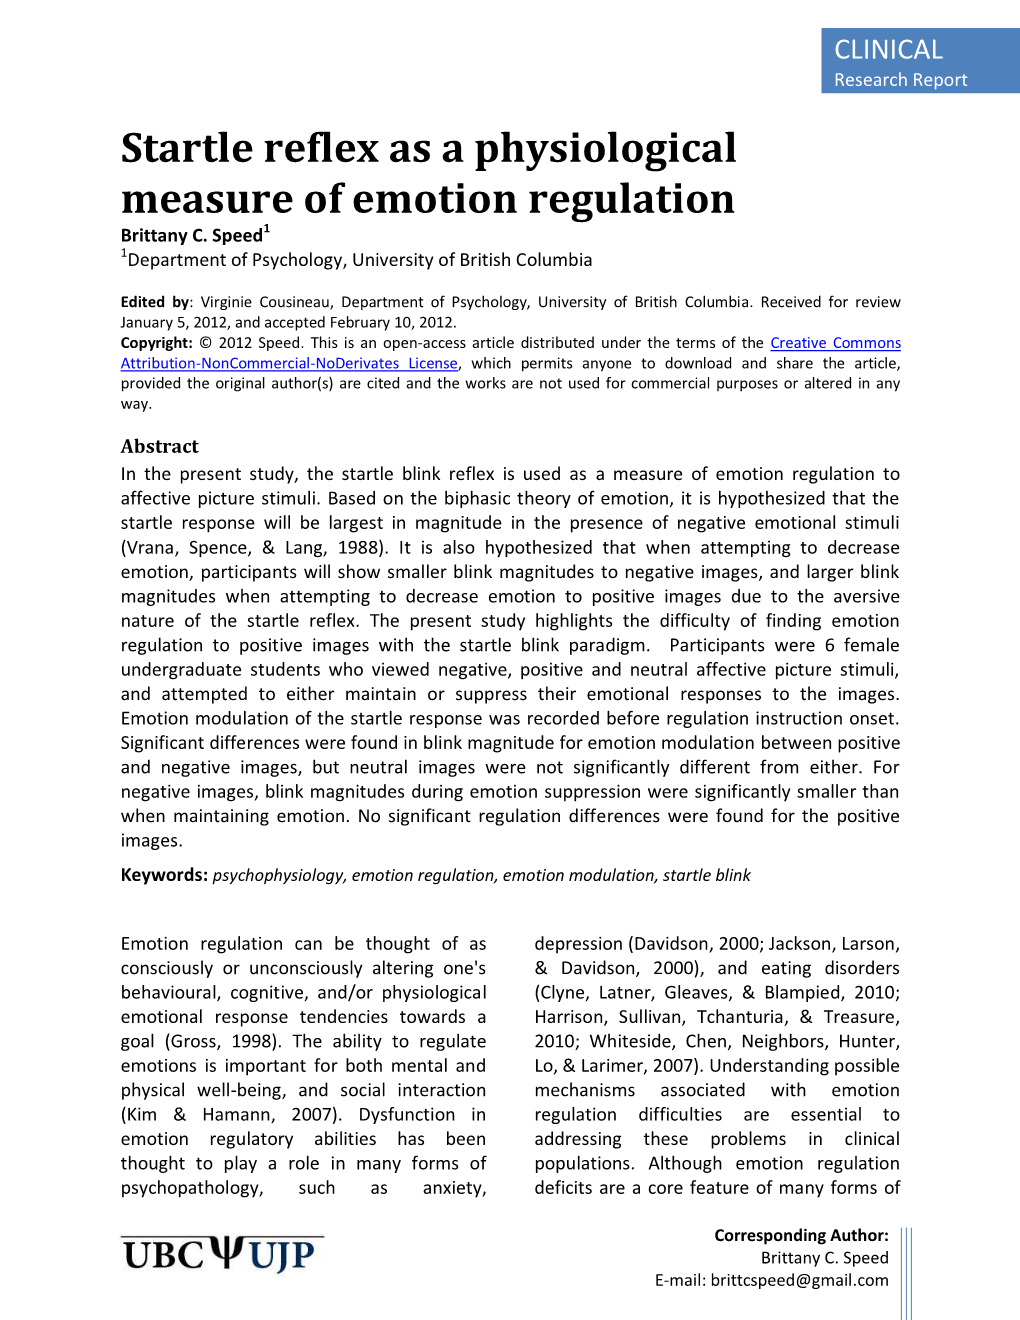 Startle Reflex As a Physiological Measure of Emotion Regulation Brittany C